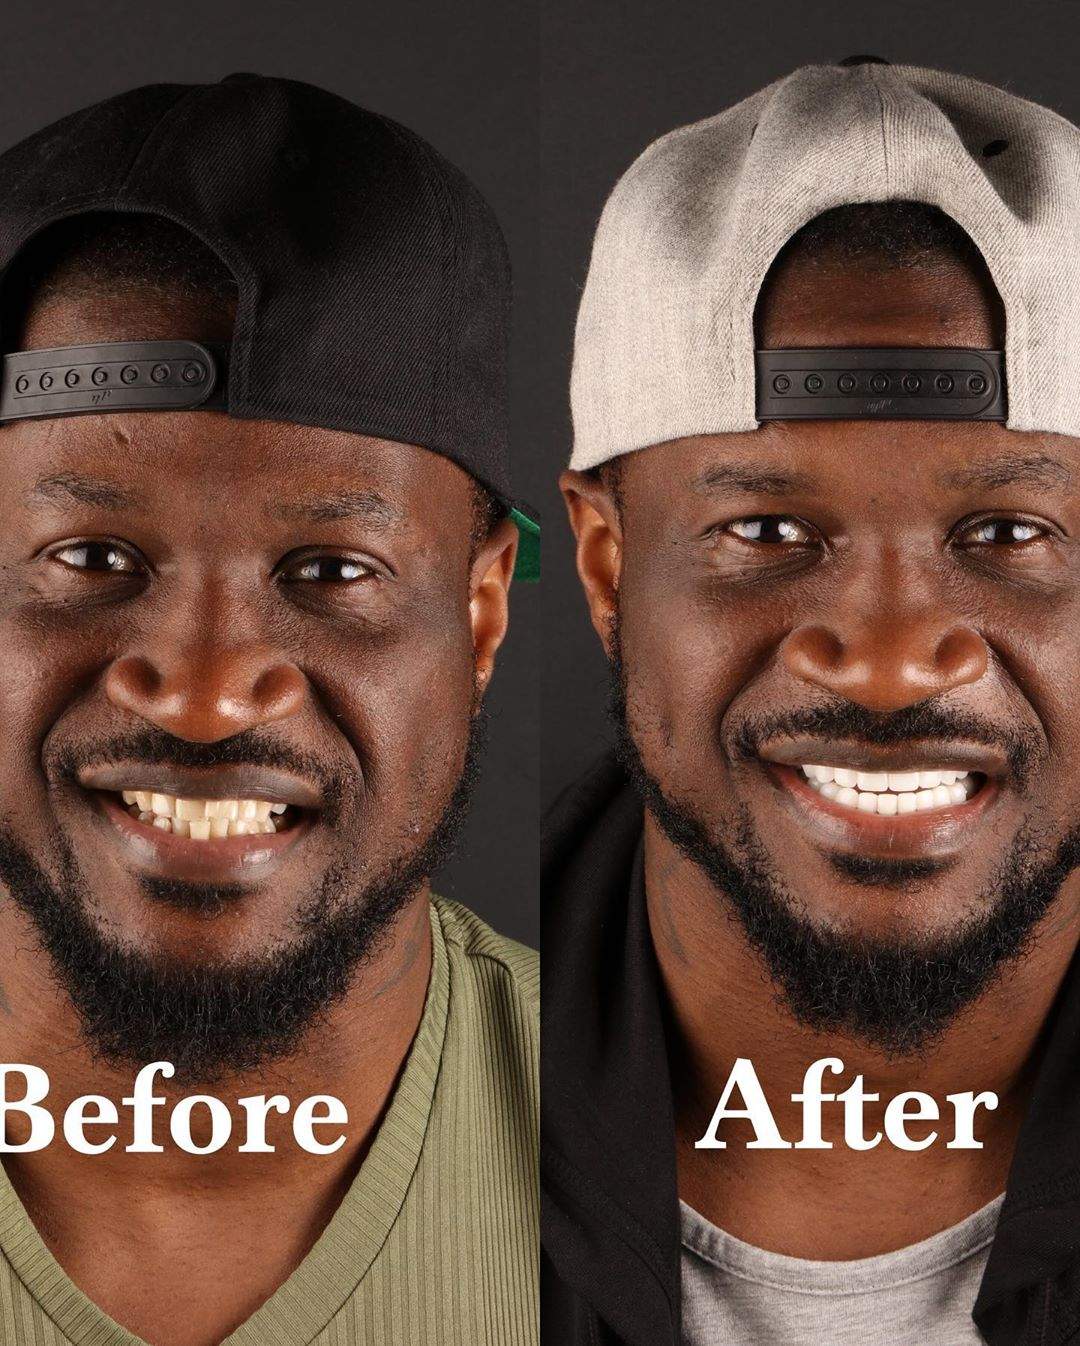 Peter Okoye apologizes to ladies he has kissed after fixing his teeth and undergoing teeth whitening